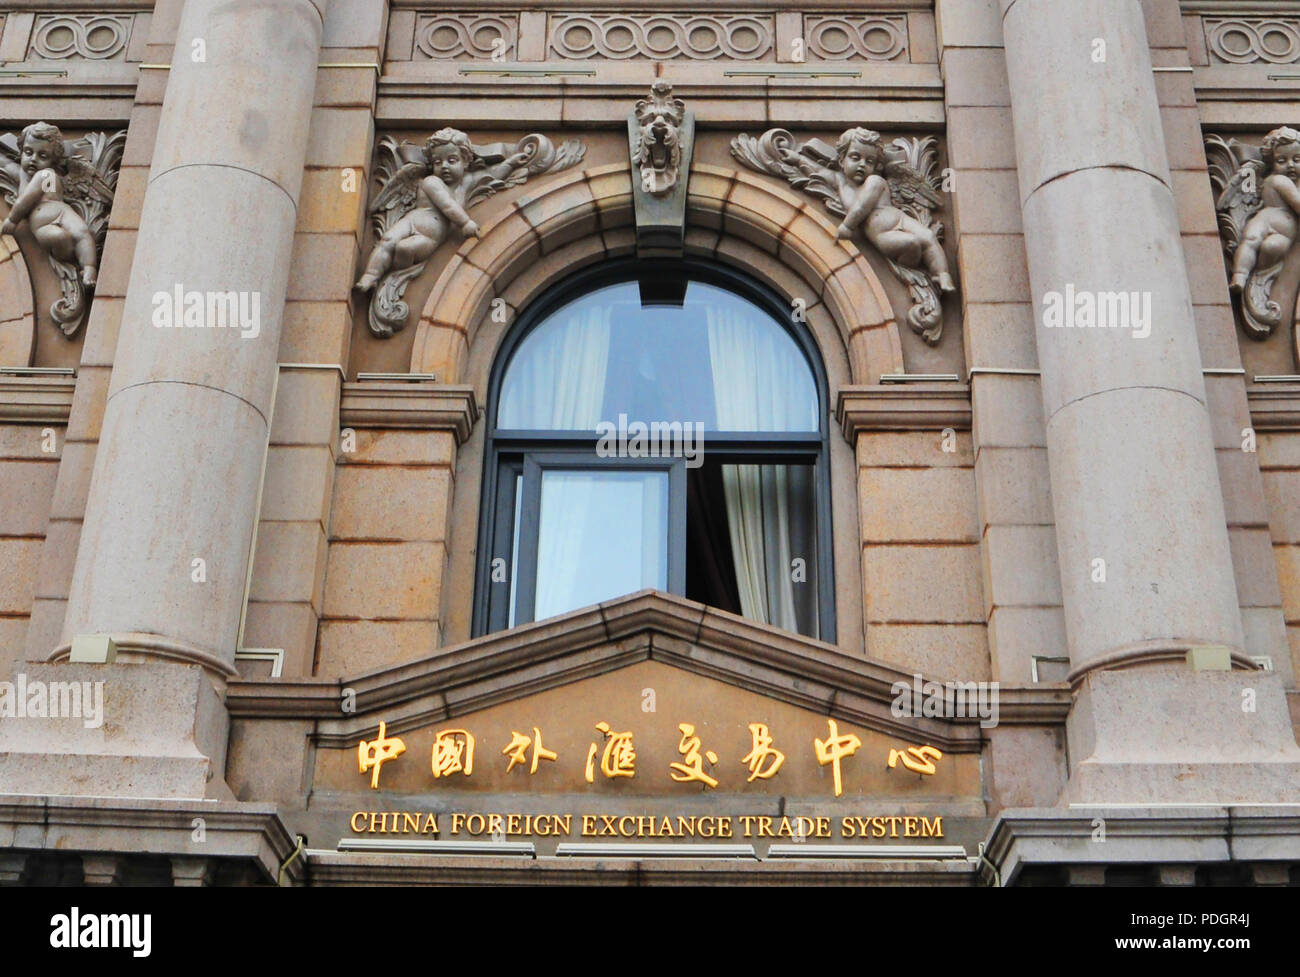 China Foreign Exchange Trade System building, le Bund, Shanghai, Chine Banque D'Images